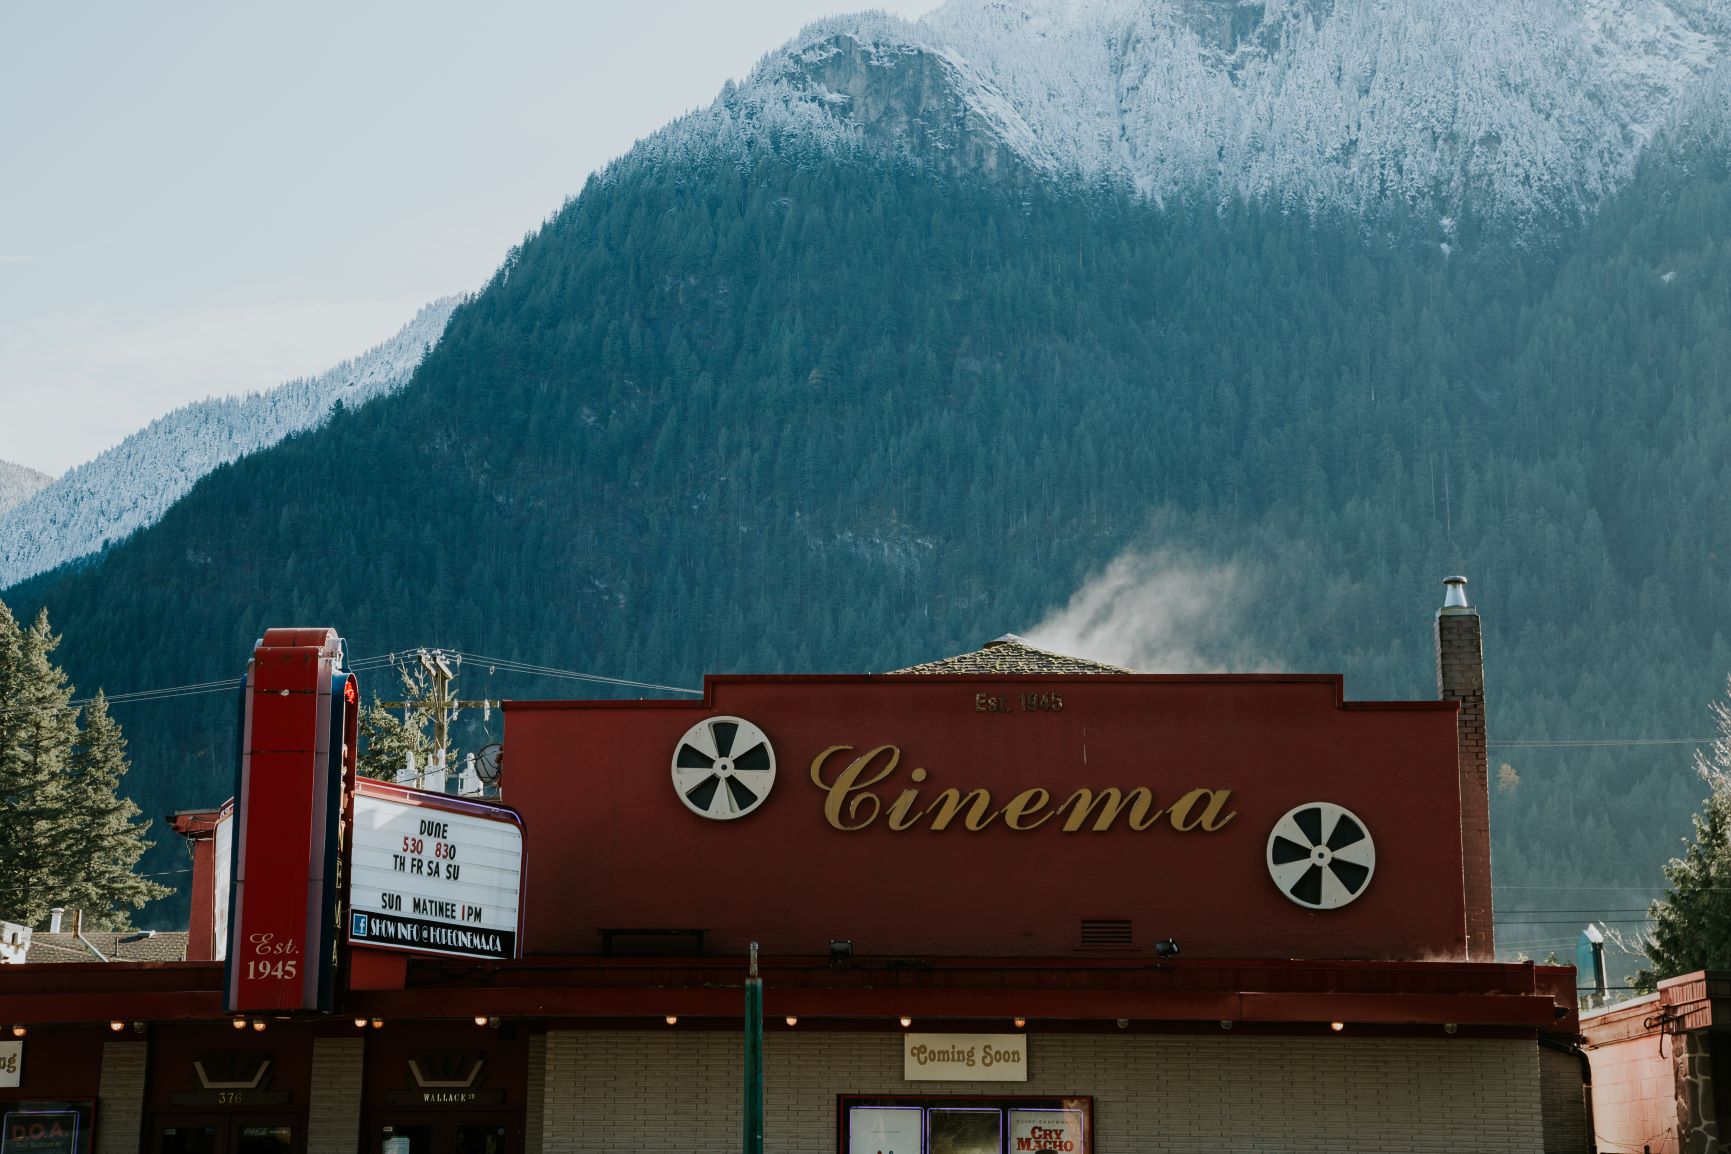 Holiday Movies at the Hope Cinema - Tourism Hope Cascades and Canyons - BC Tourism